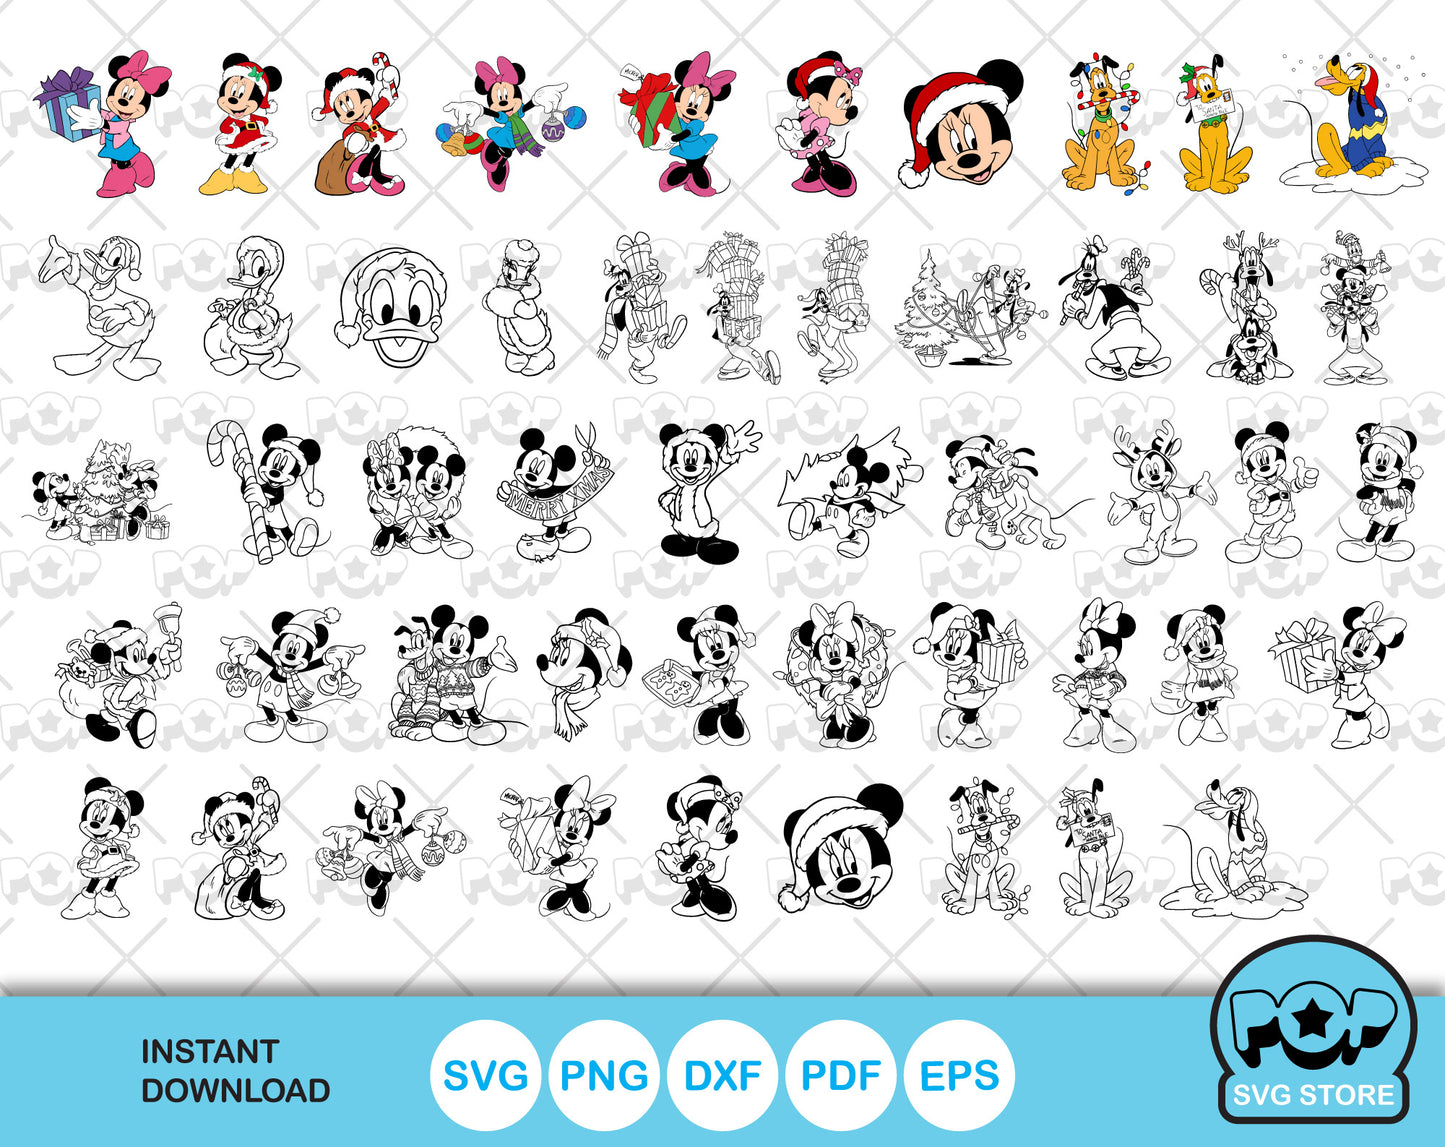 Disney Christmas new Clipart bundle, Mickey Mouse Christmas SVG cut files for Cricut / Silhouette, PNG, DXF, instant download